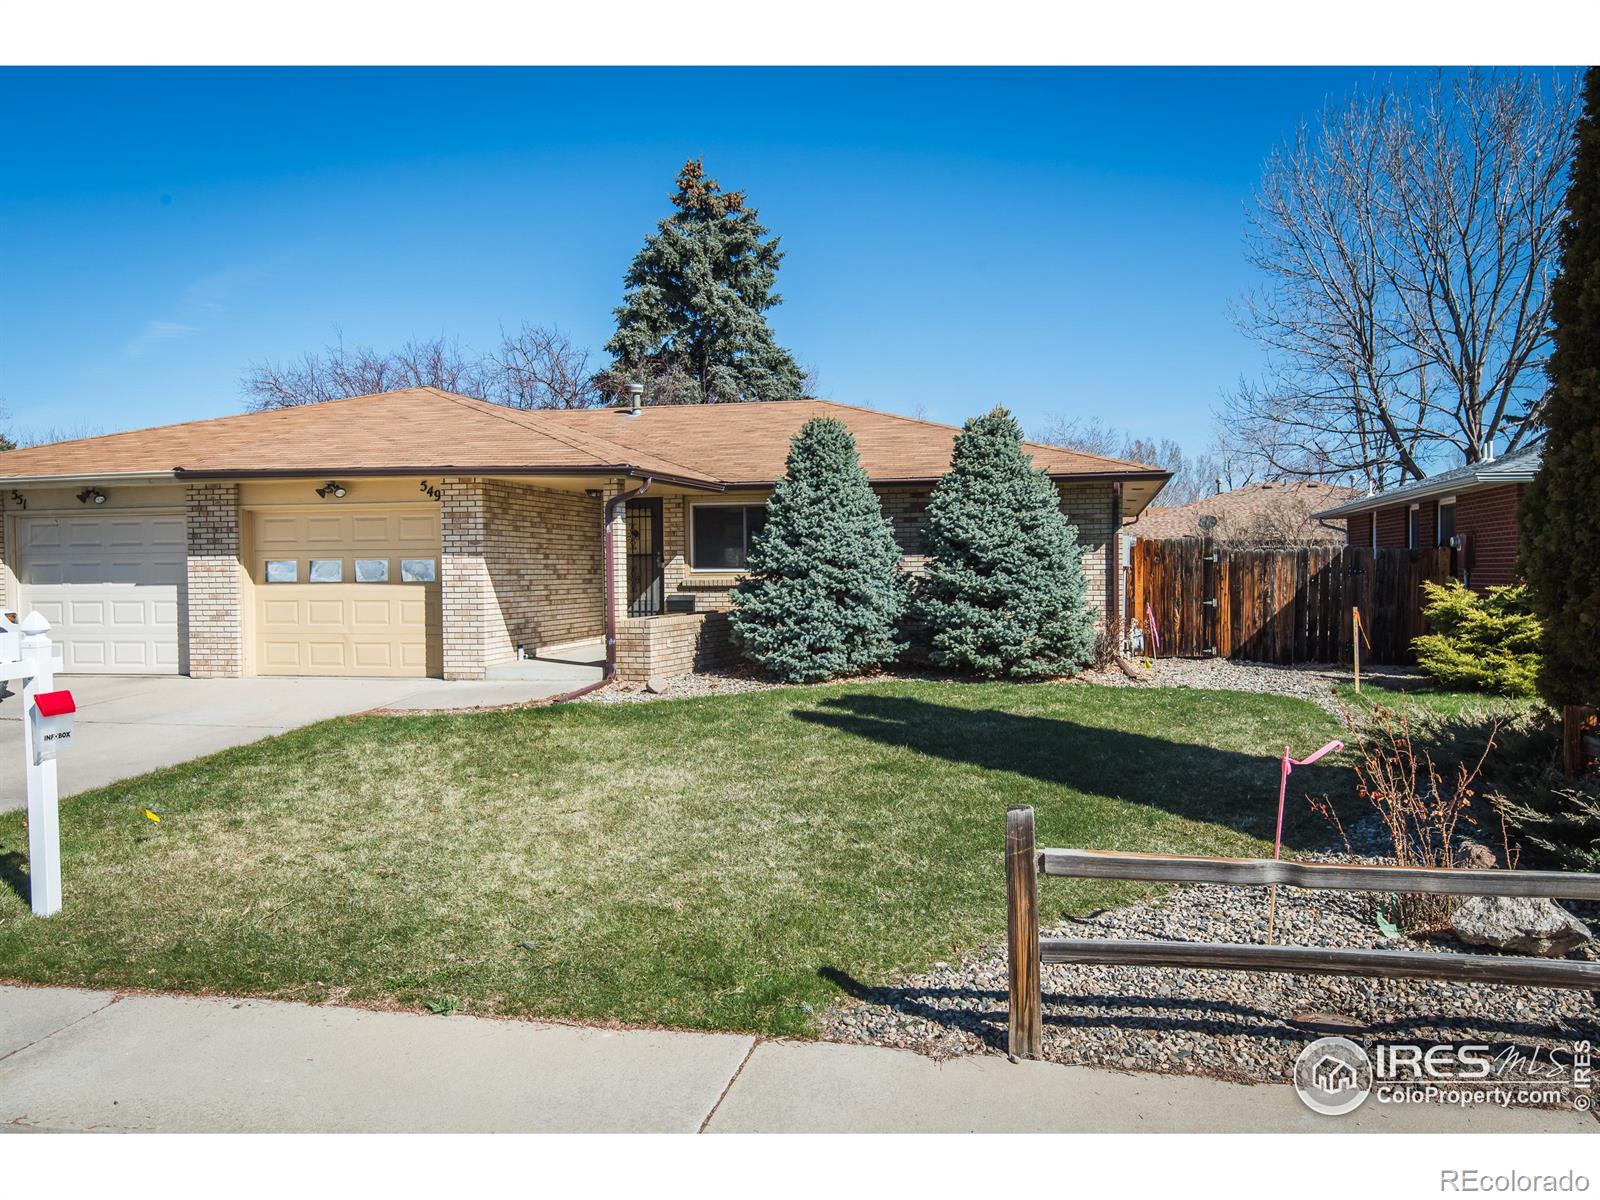 Report Image for 549 W 38th Street,Loveland, Colorado